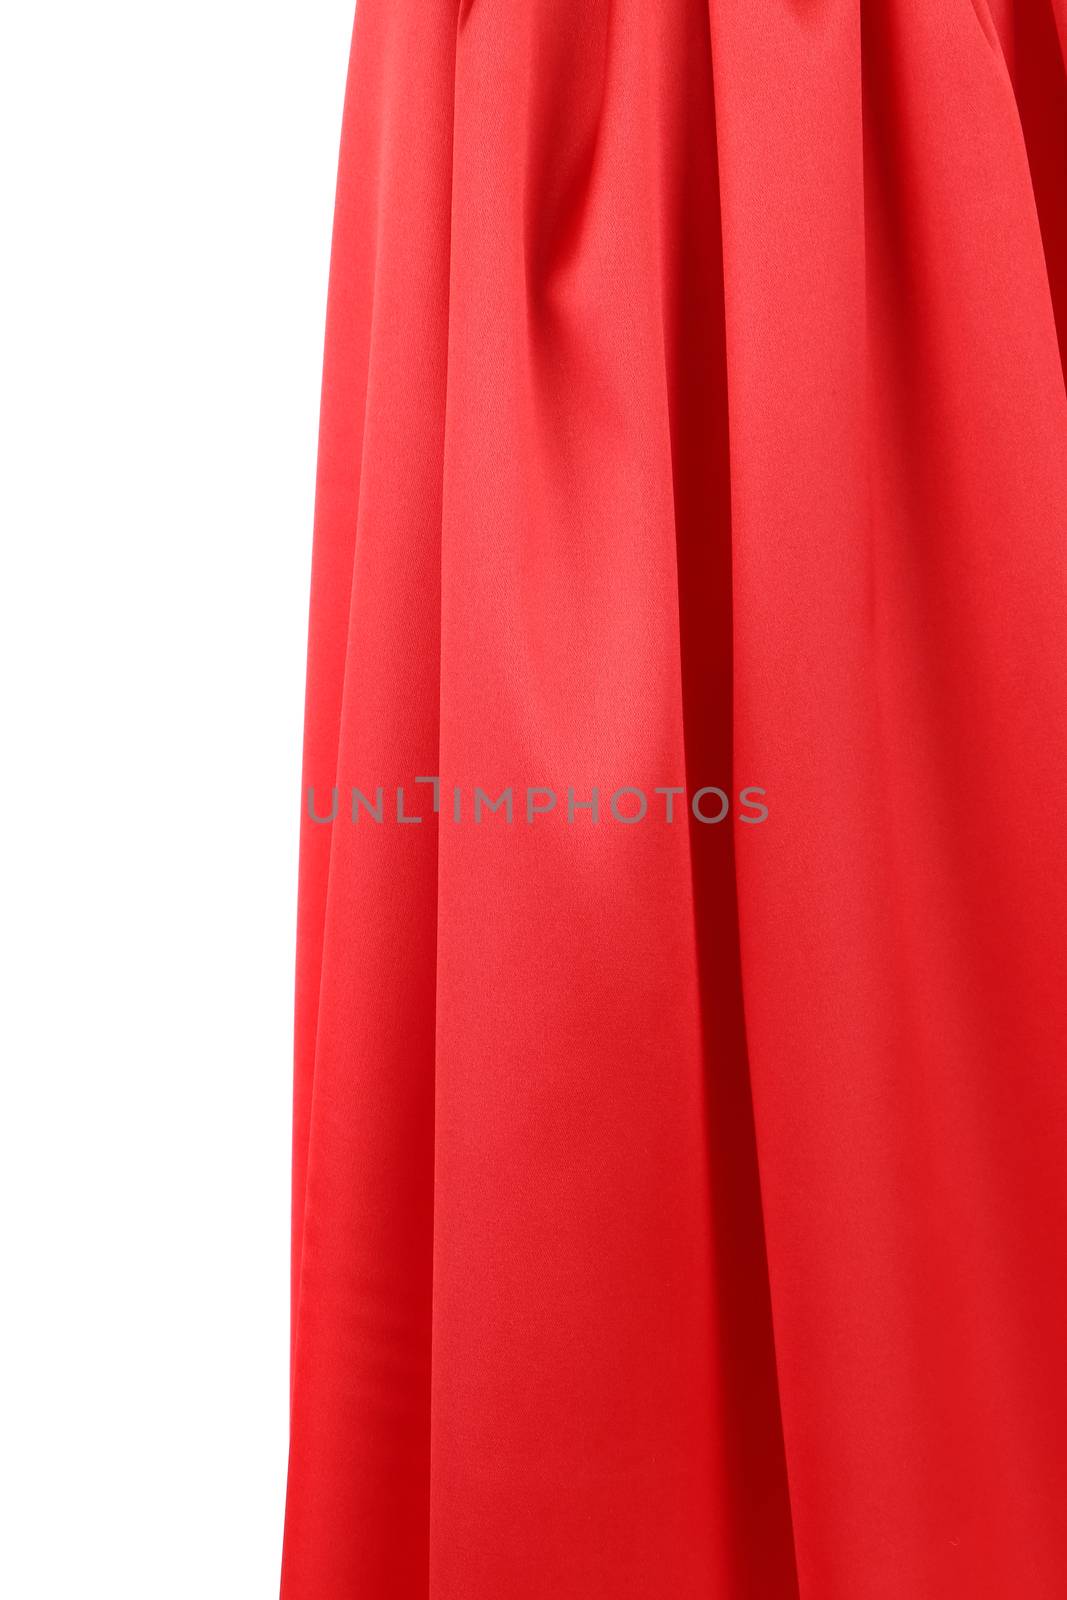 Red silk drapery. Isolated on a white background.